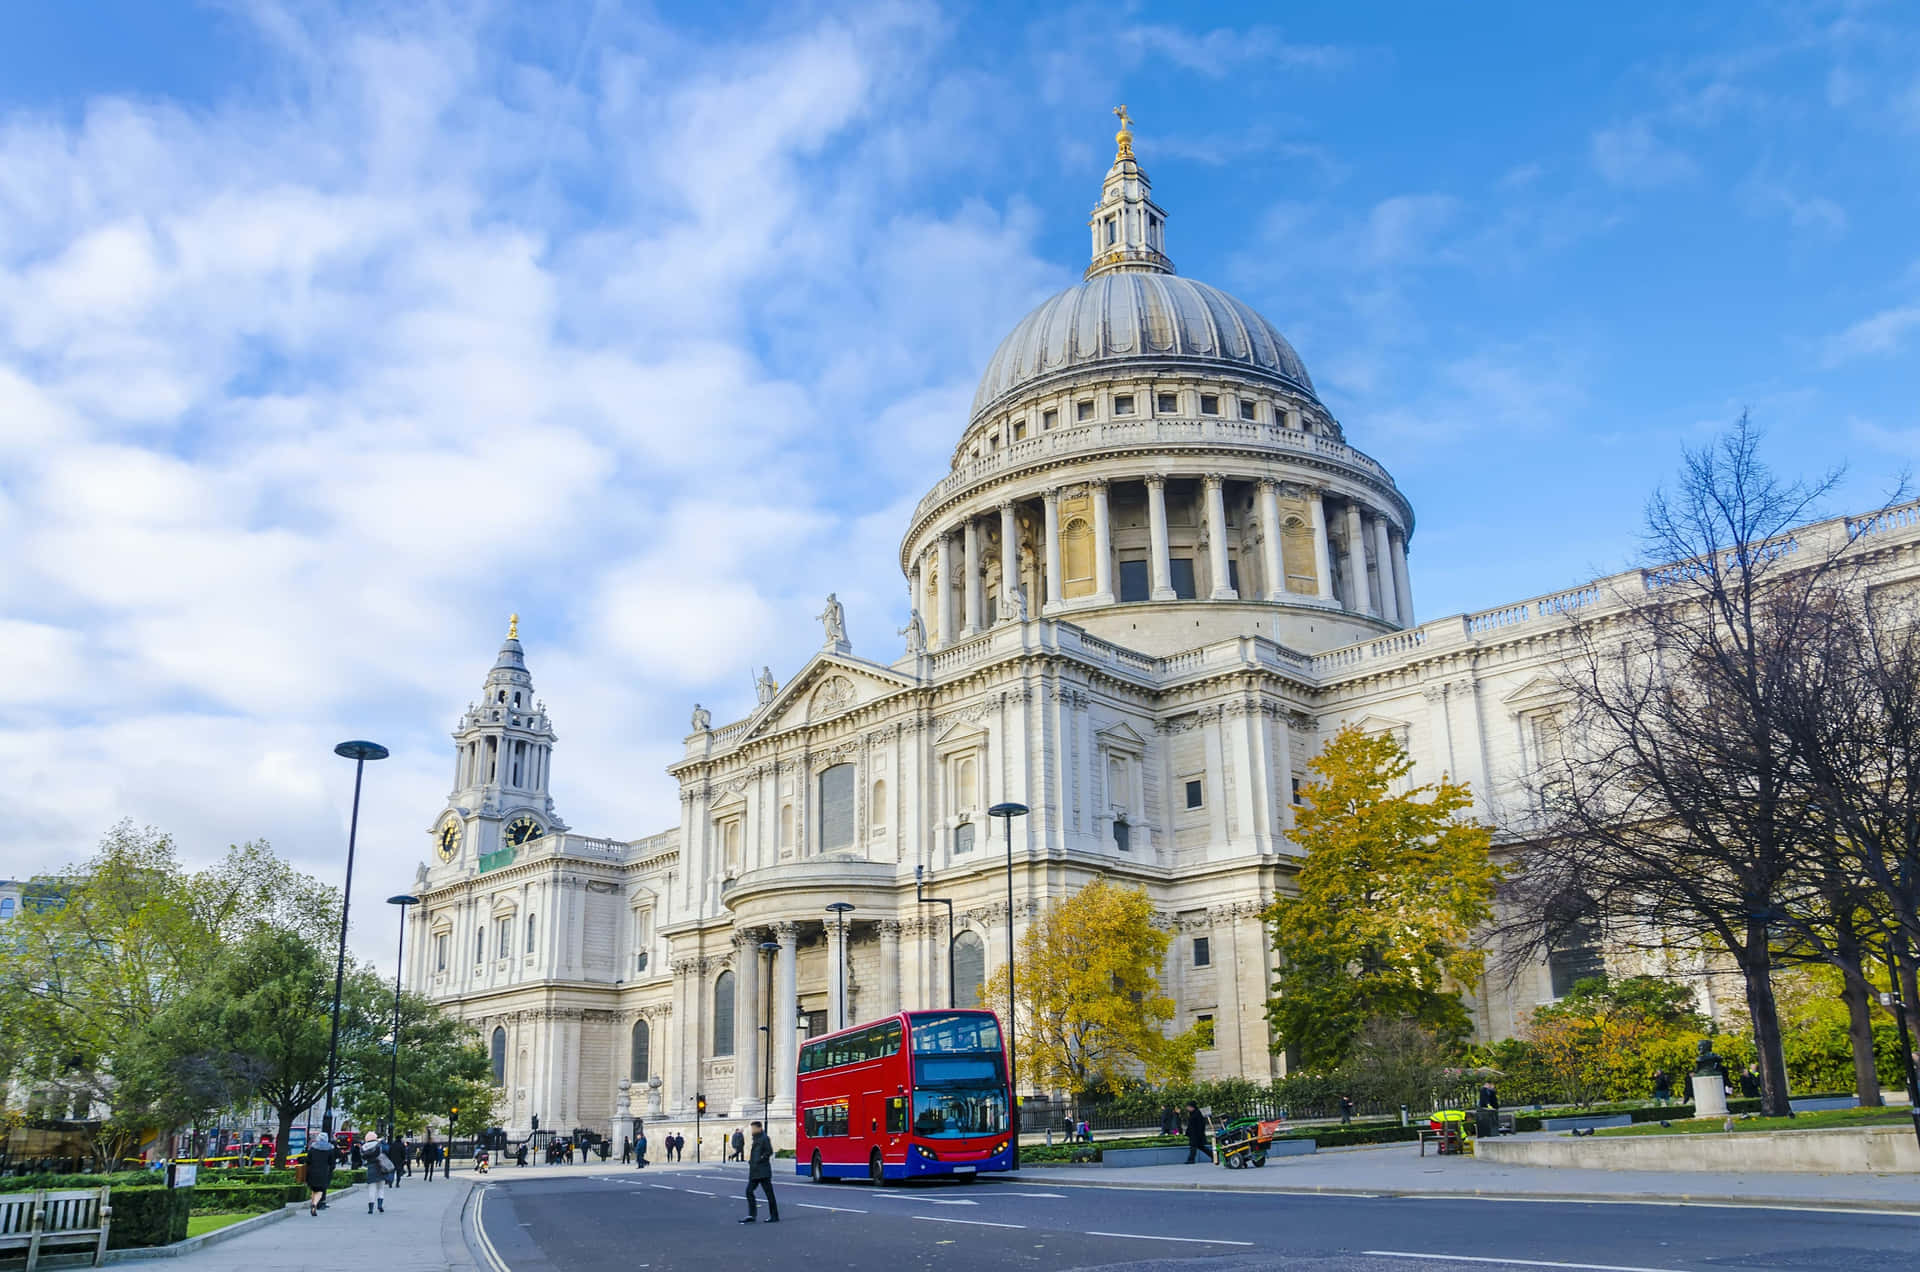 St. Paul's Cathedral, London: A Legacy Spanning Centuries